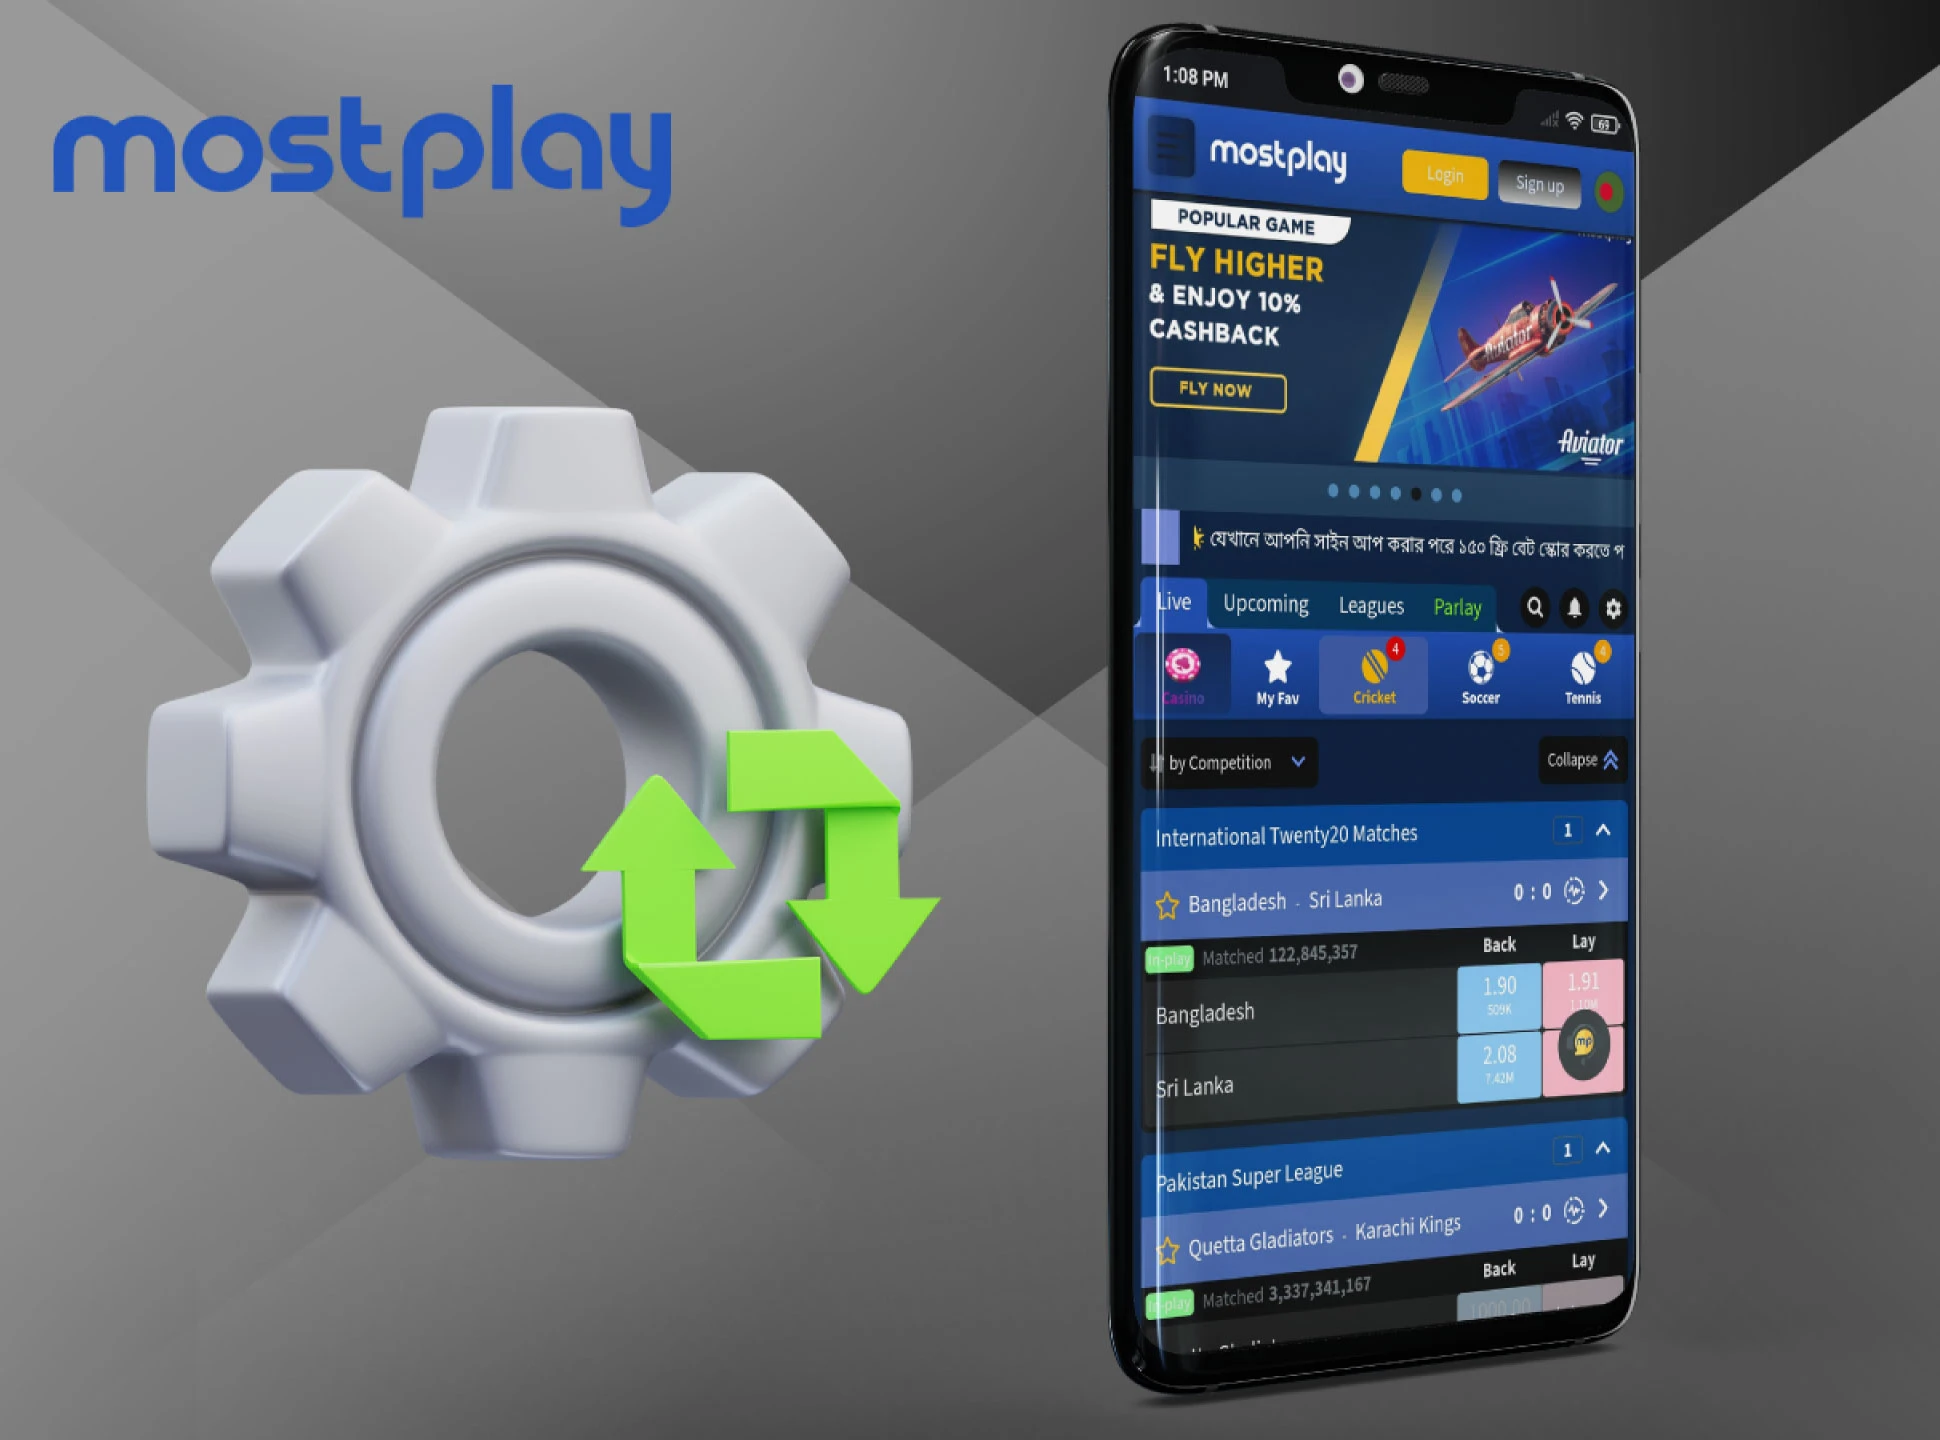 Just wait for a special message to have always the latest version of Mostplay software.